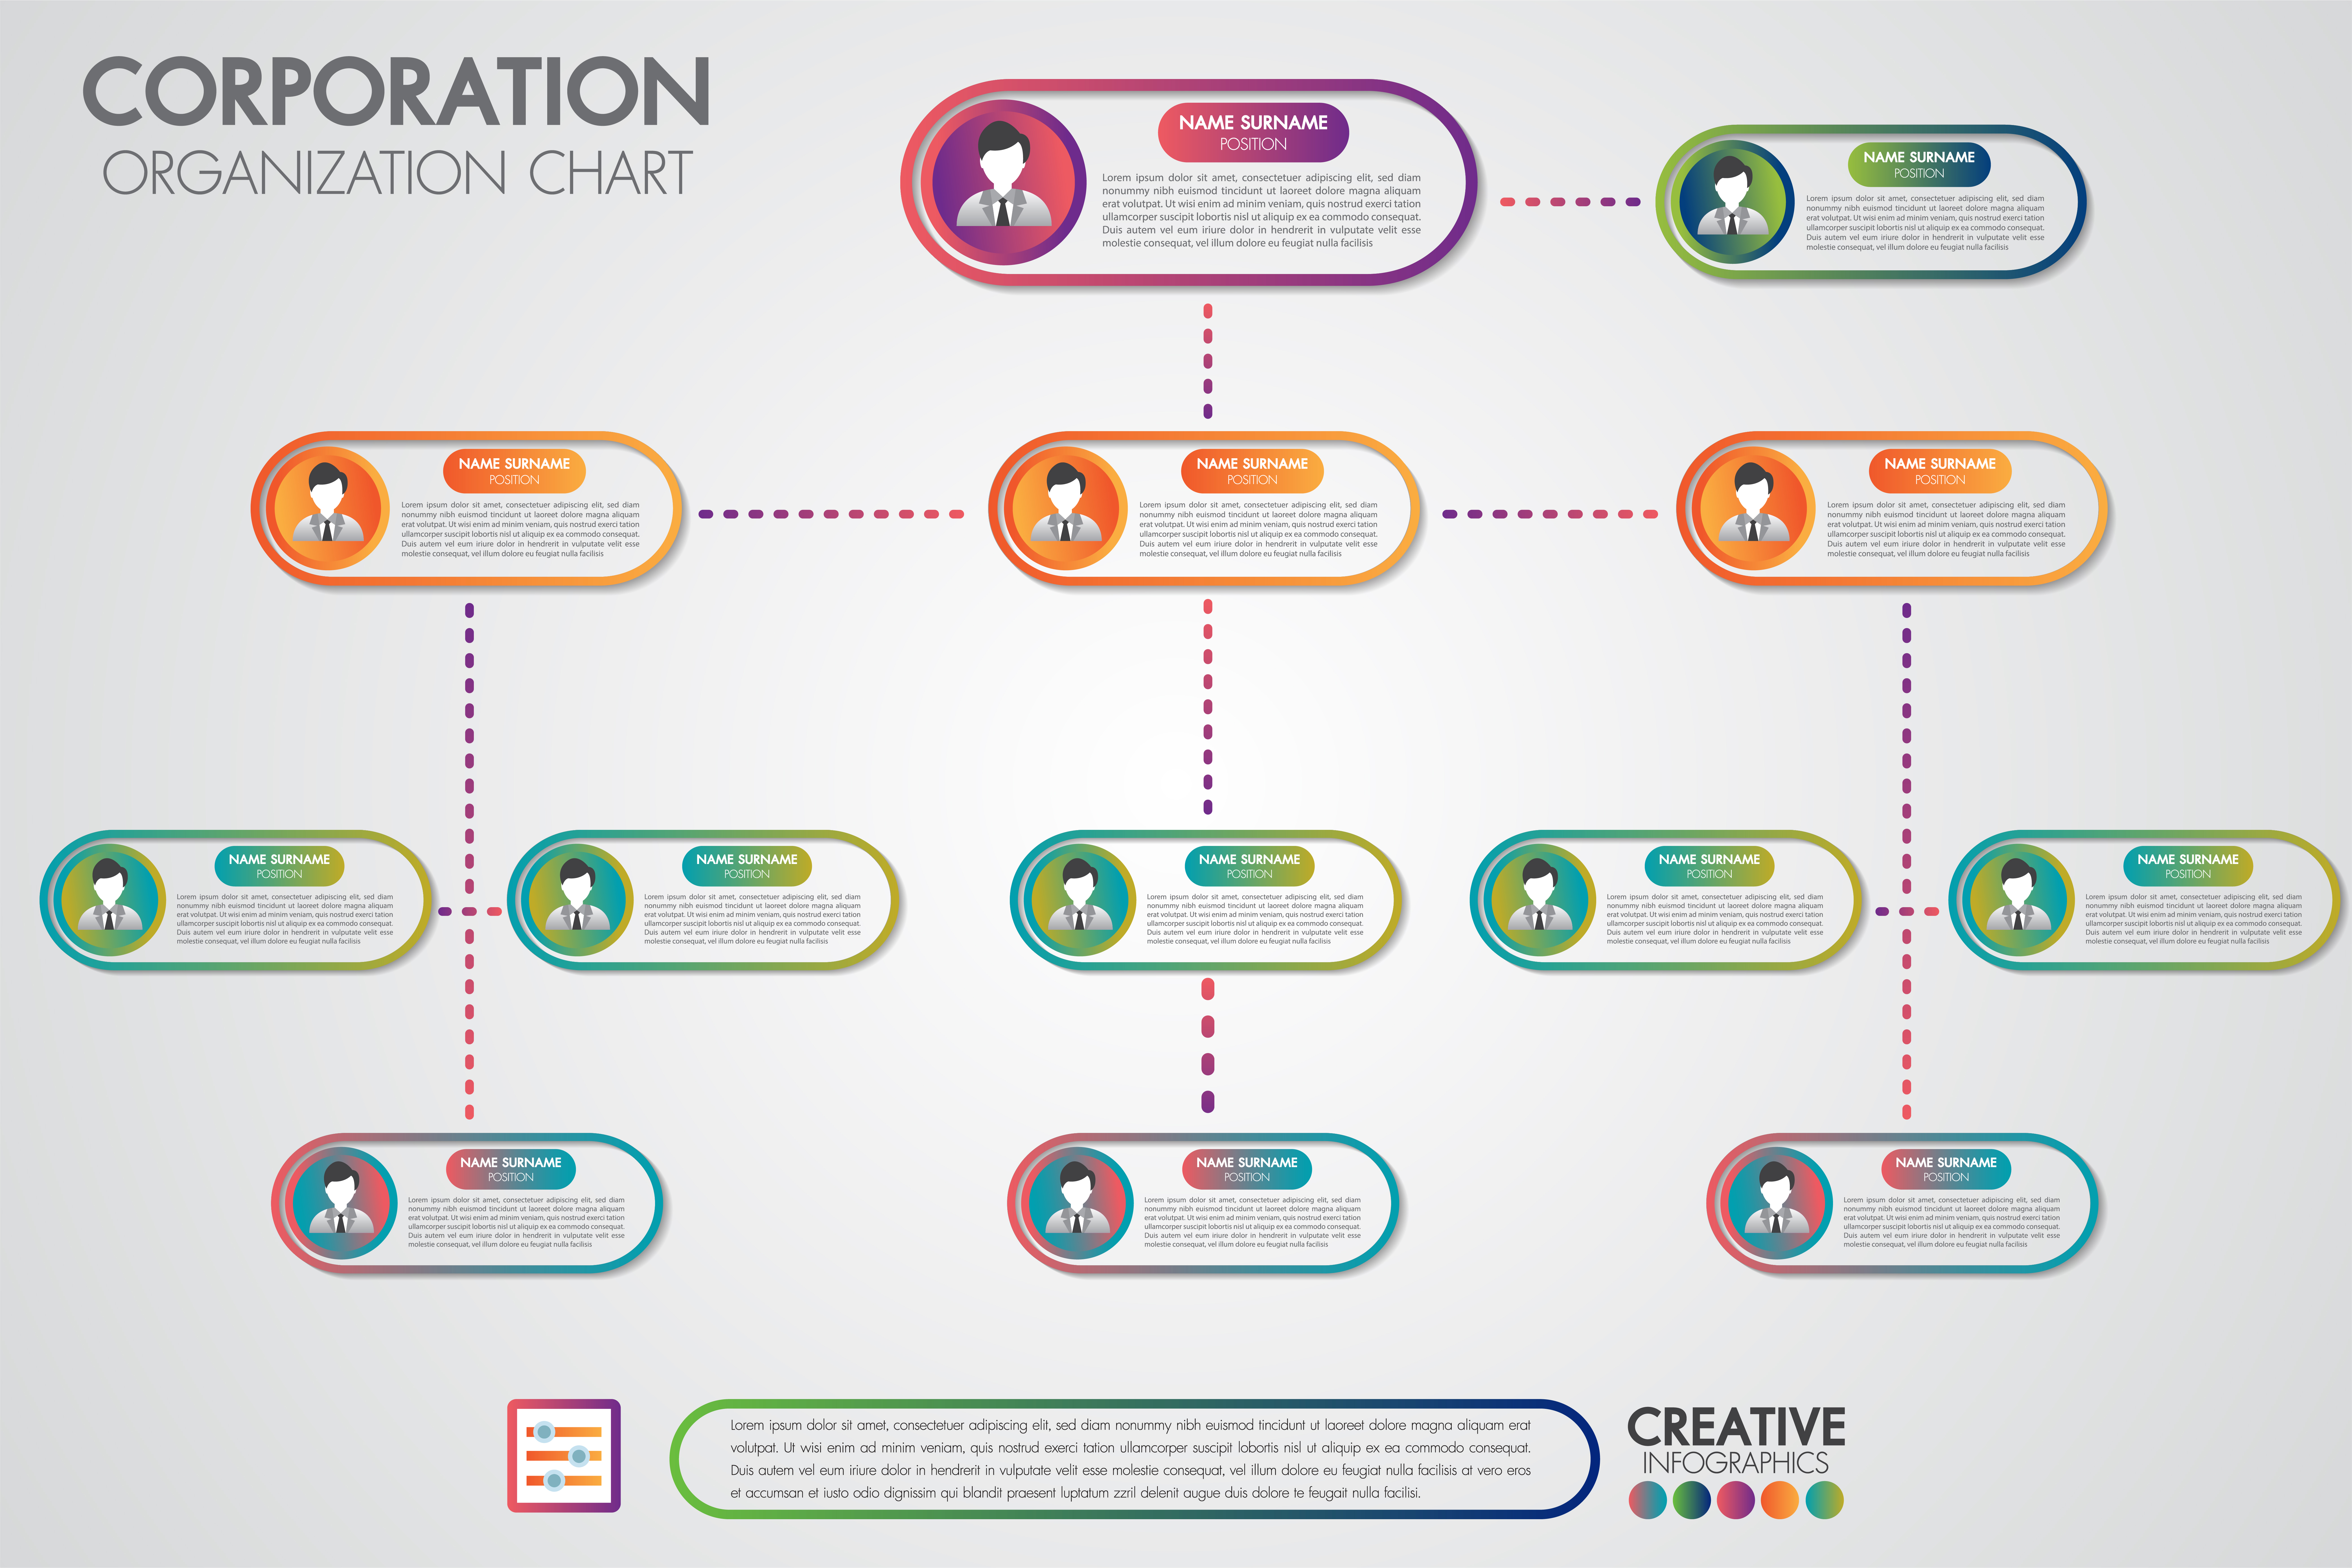 Corporate Organization Chart Template With Business People Icons